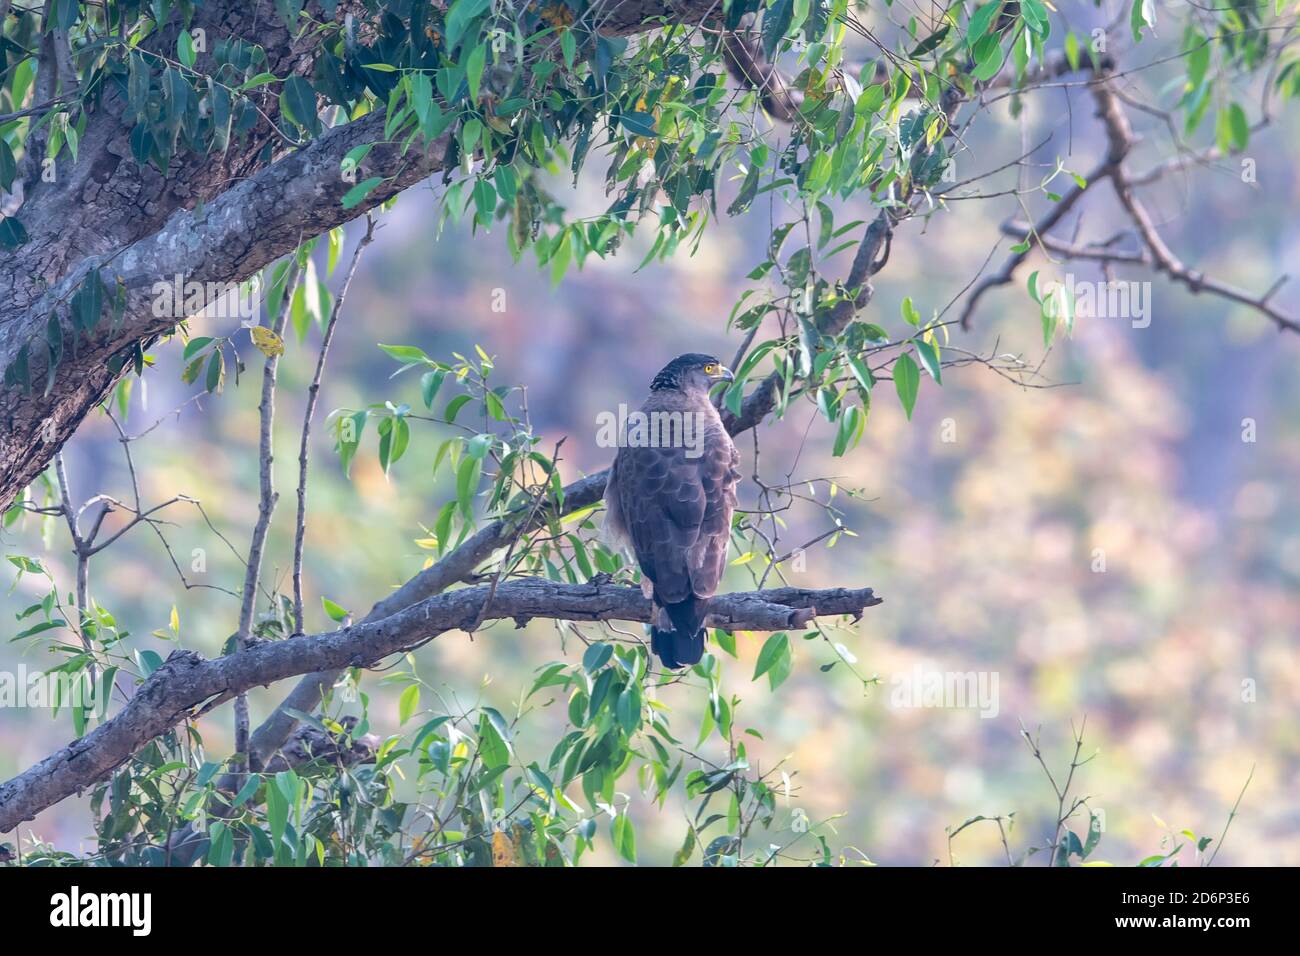 Crested honey buzzard (Pernis ptilorhynchus) perched in a tree in India Stock Photo